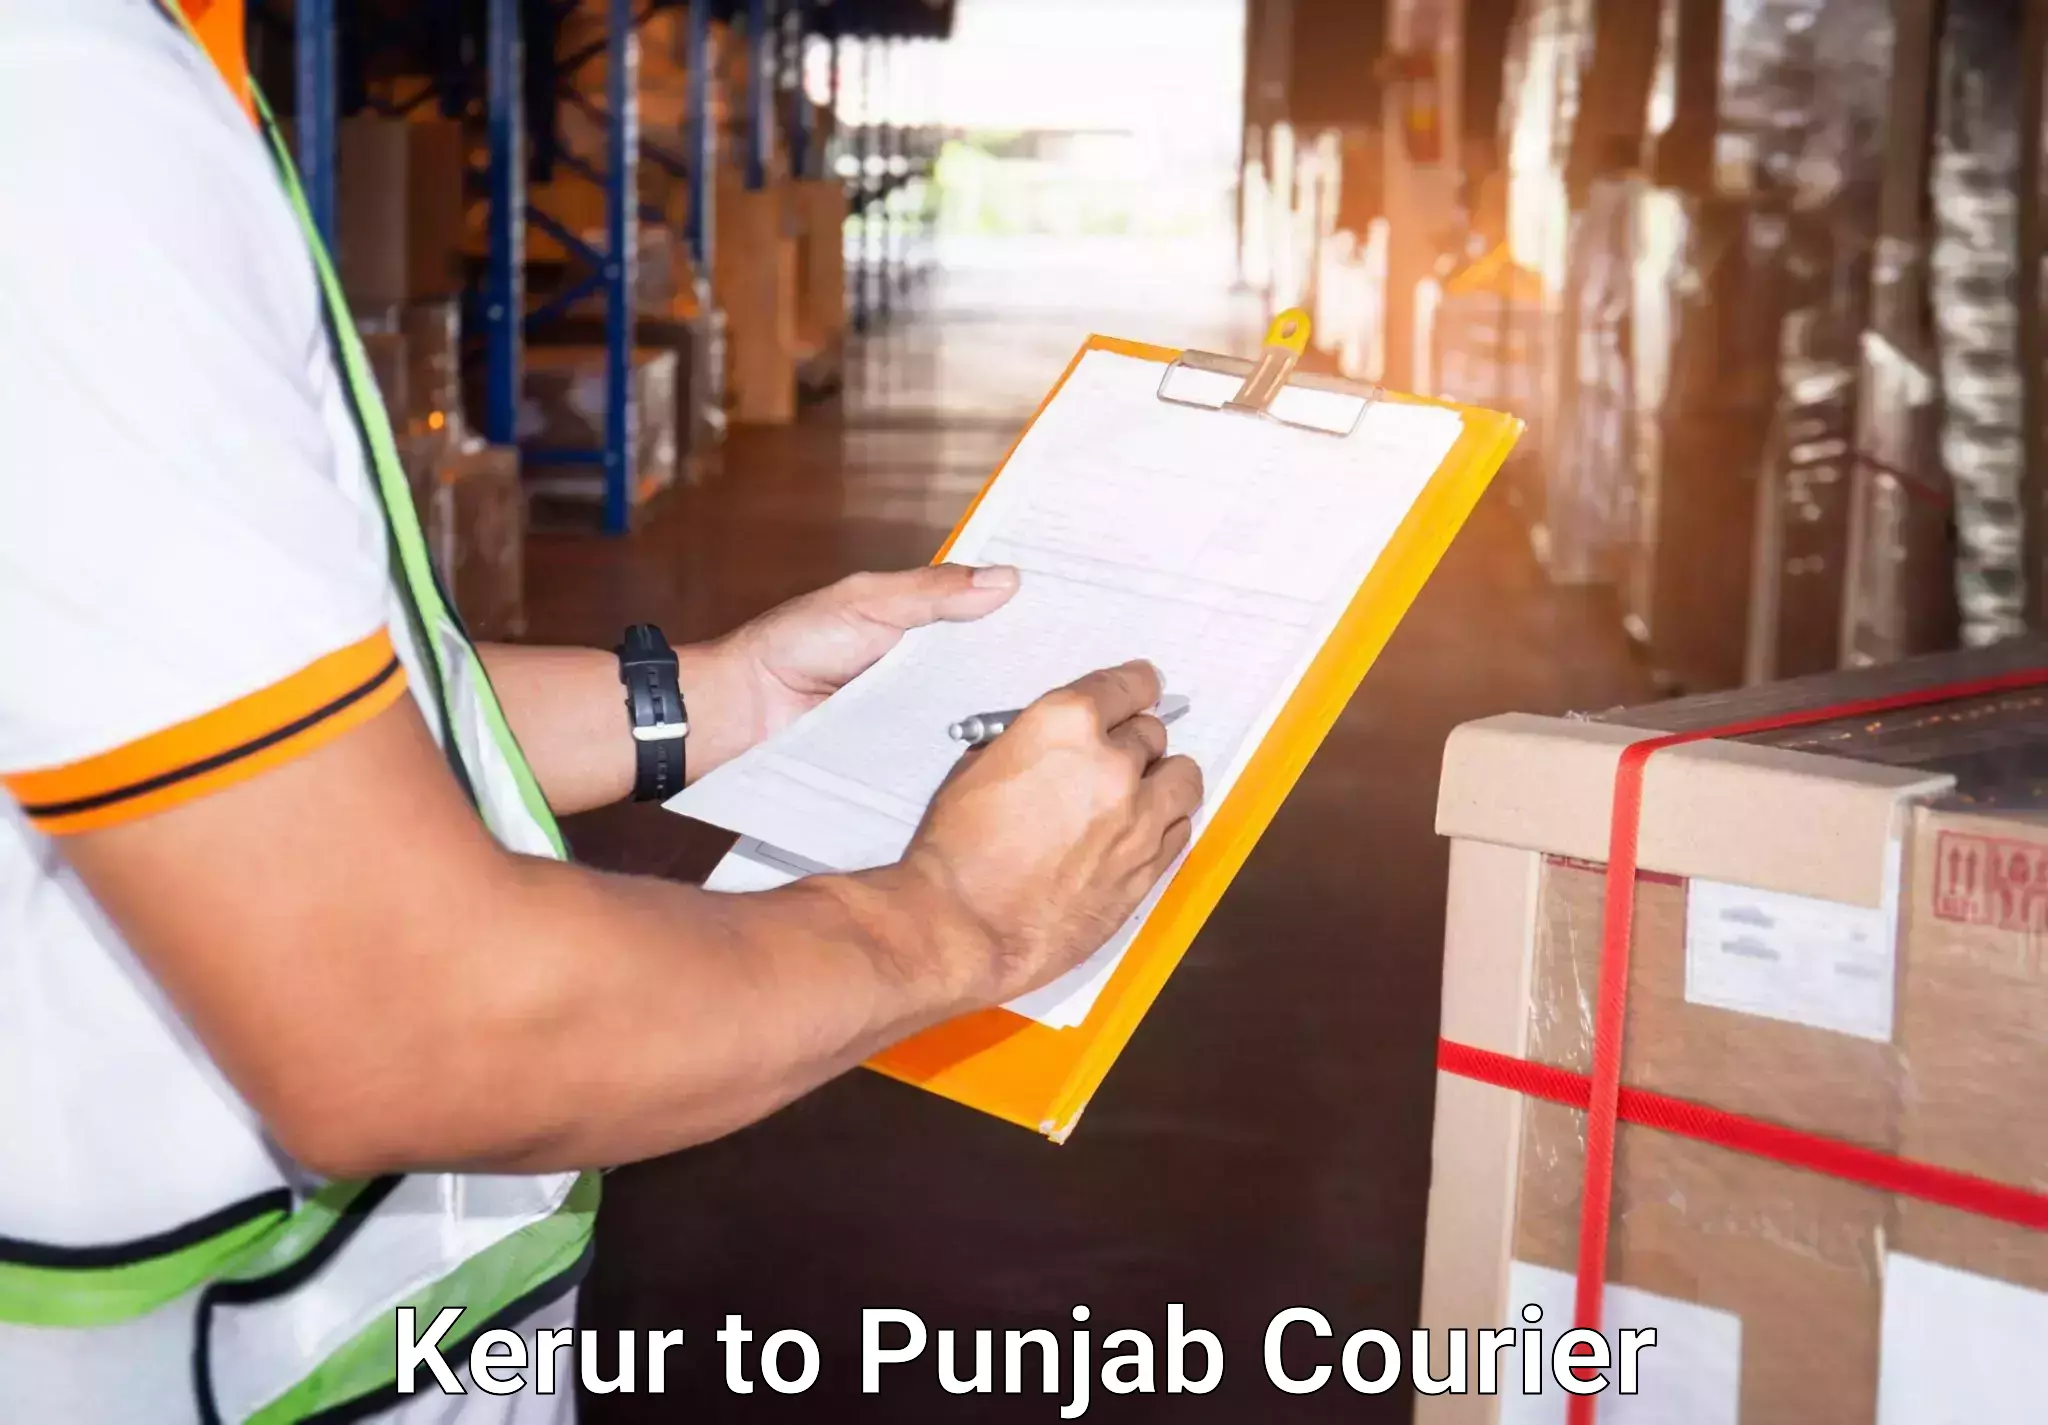 Online luggage shipping booking Kerur to Punjab Agricultural University Ludhiana